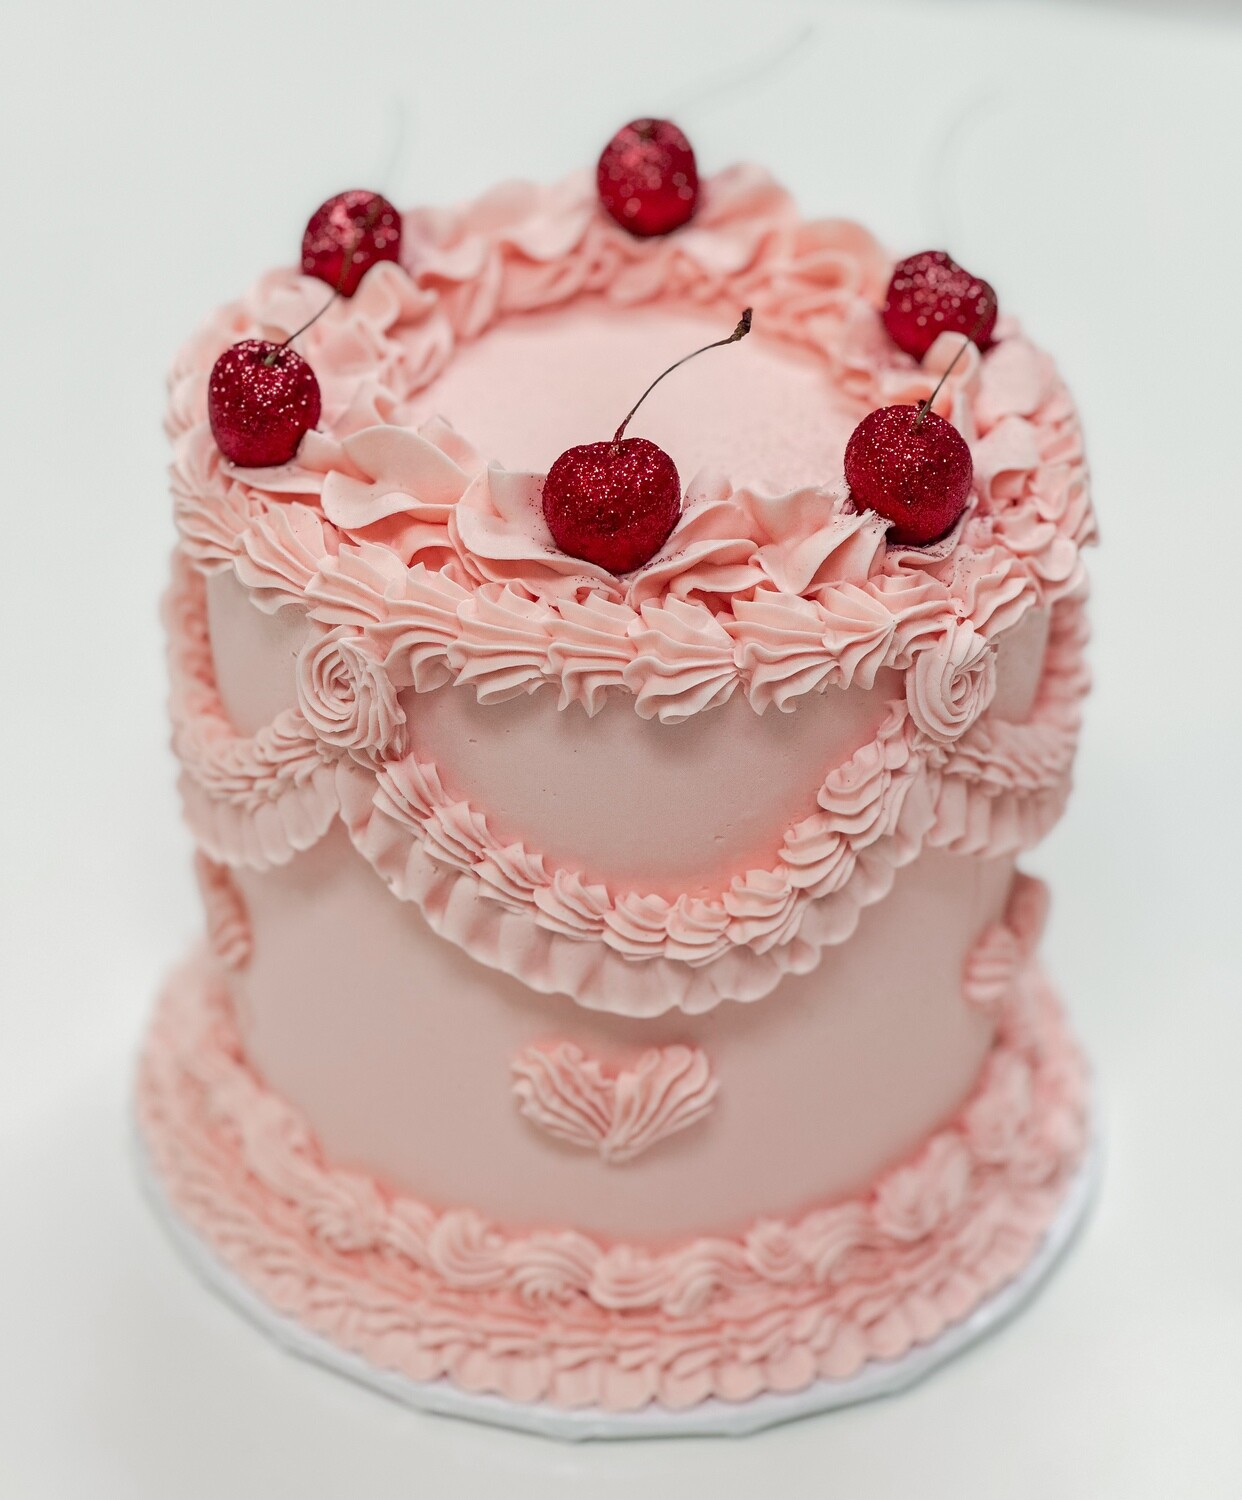 Vintage 6" Tall Cake - with glitter cherries